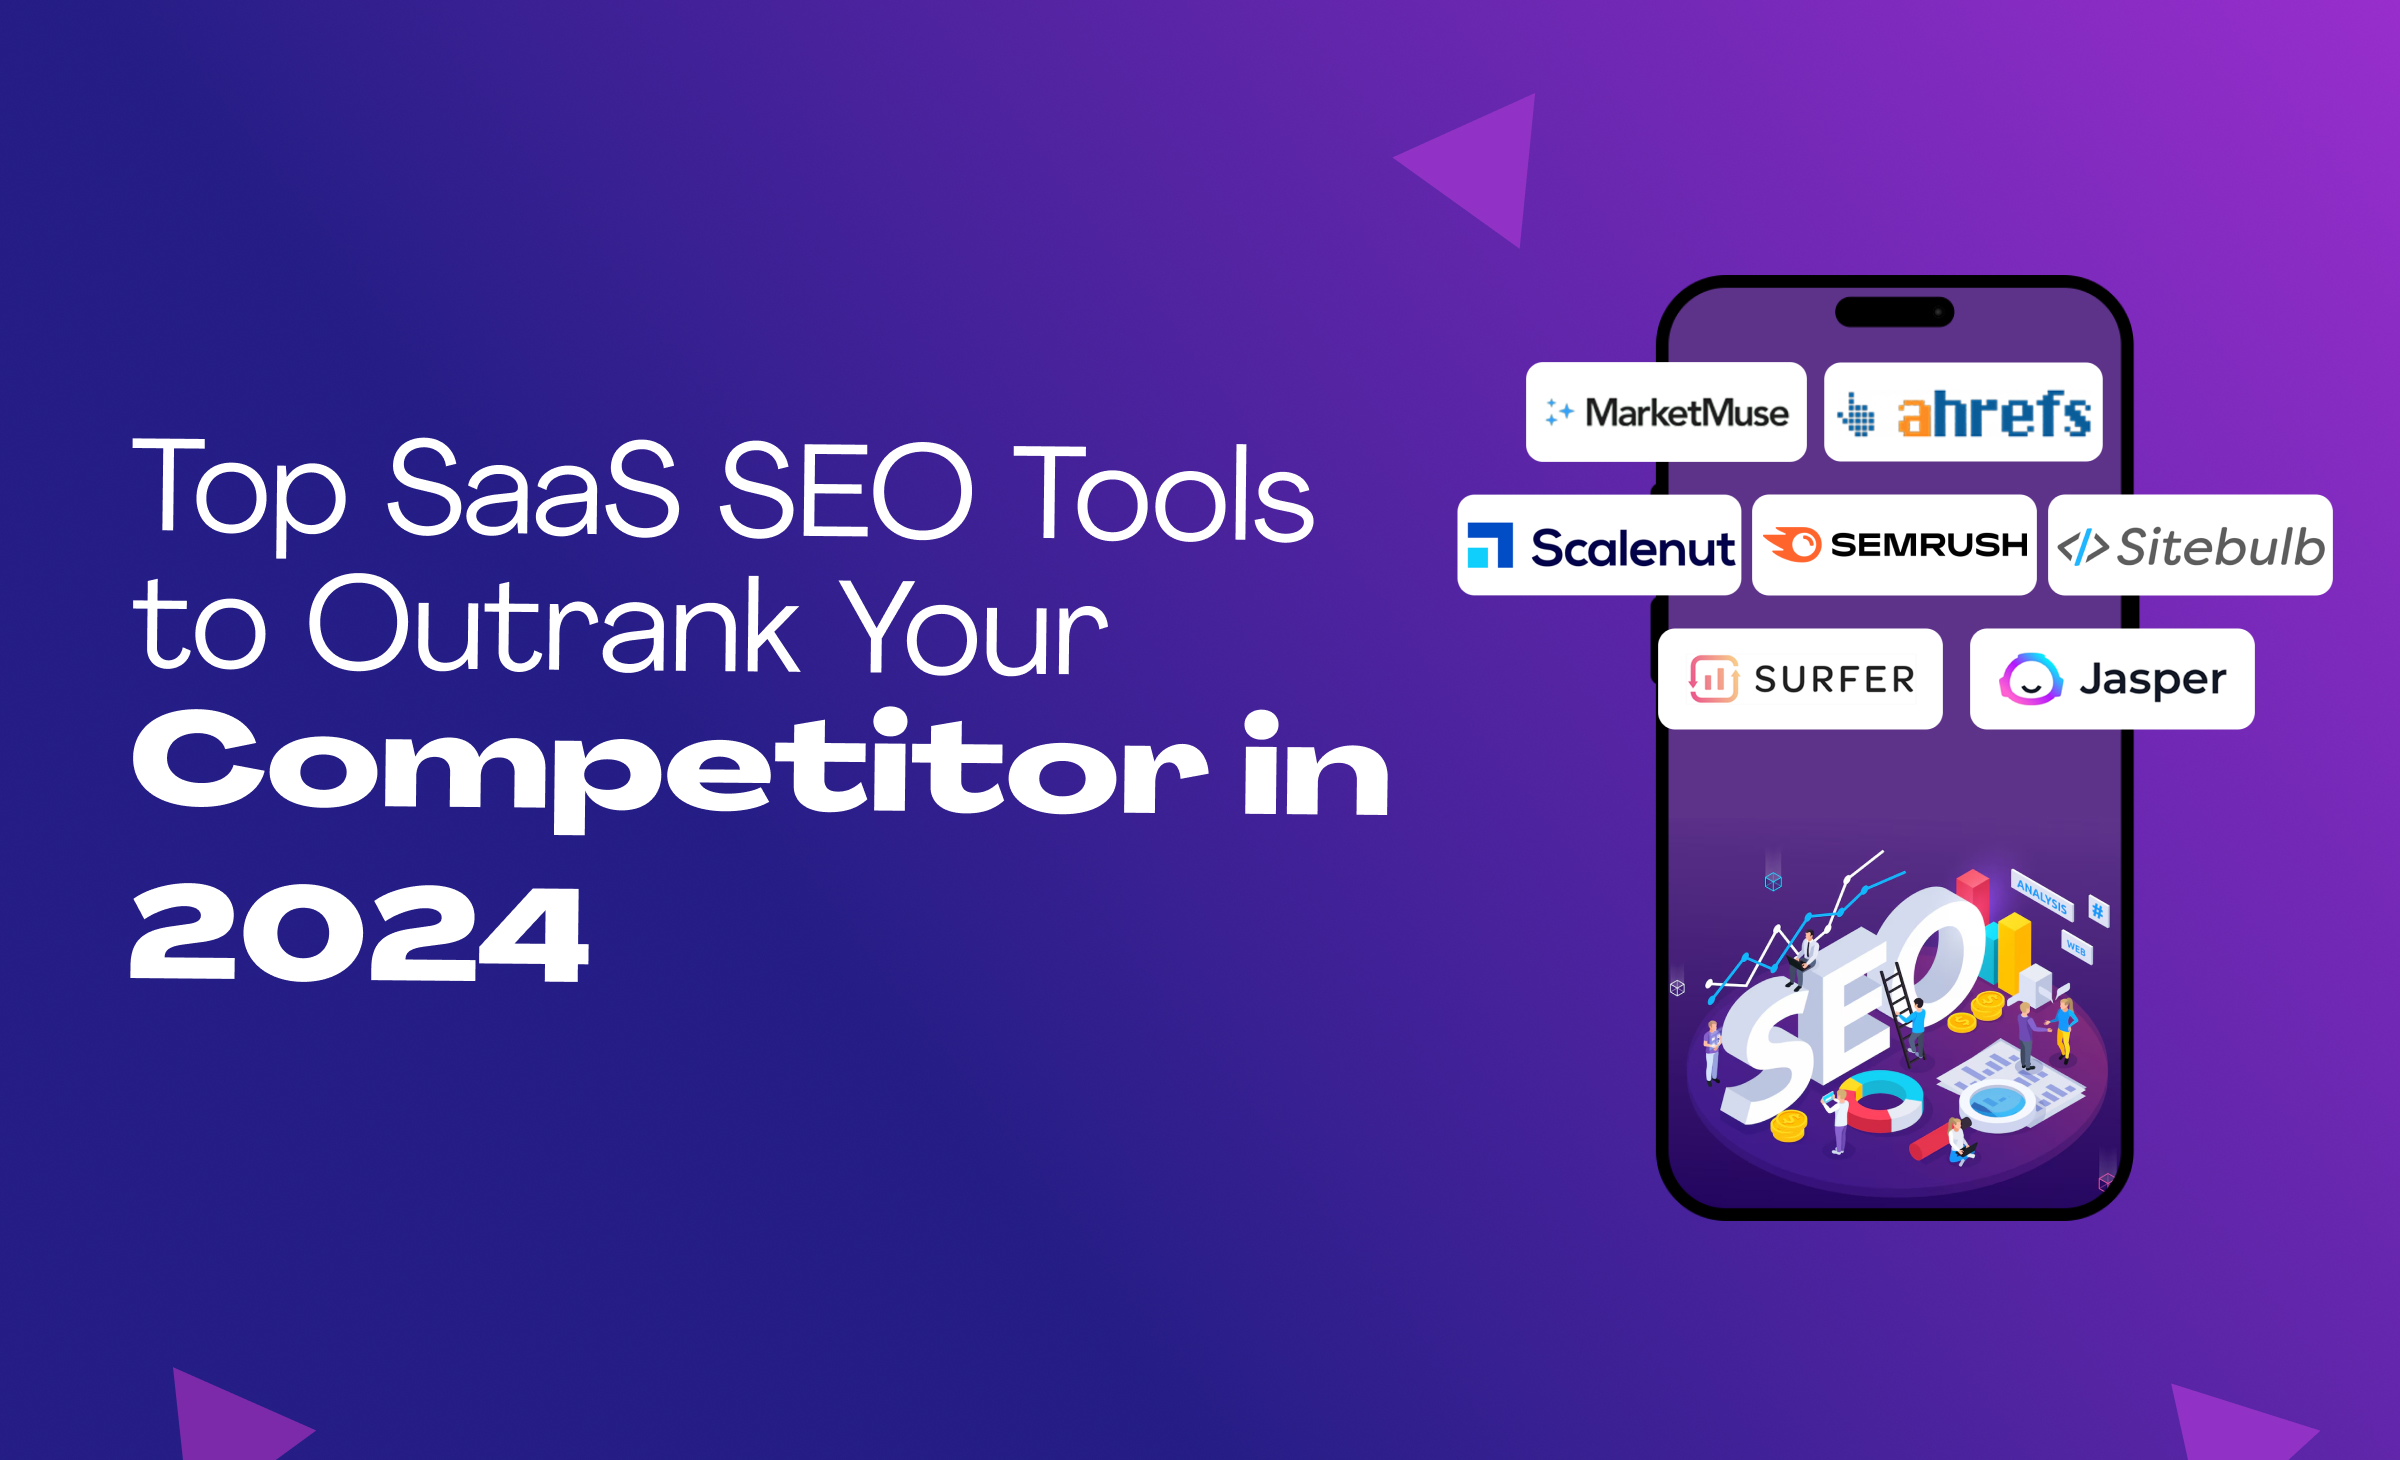 Top SaaS SEO Tools to Outrank Your Competitor in 2024